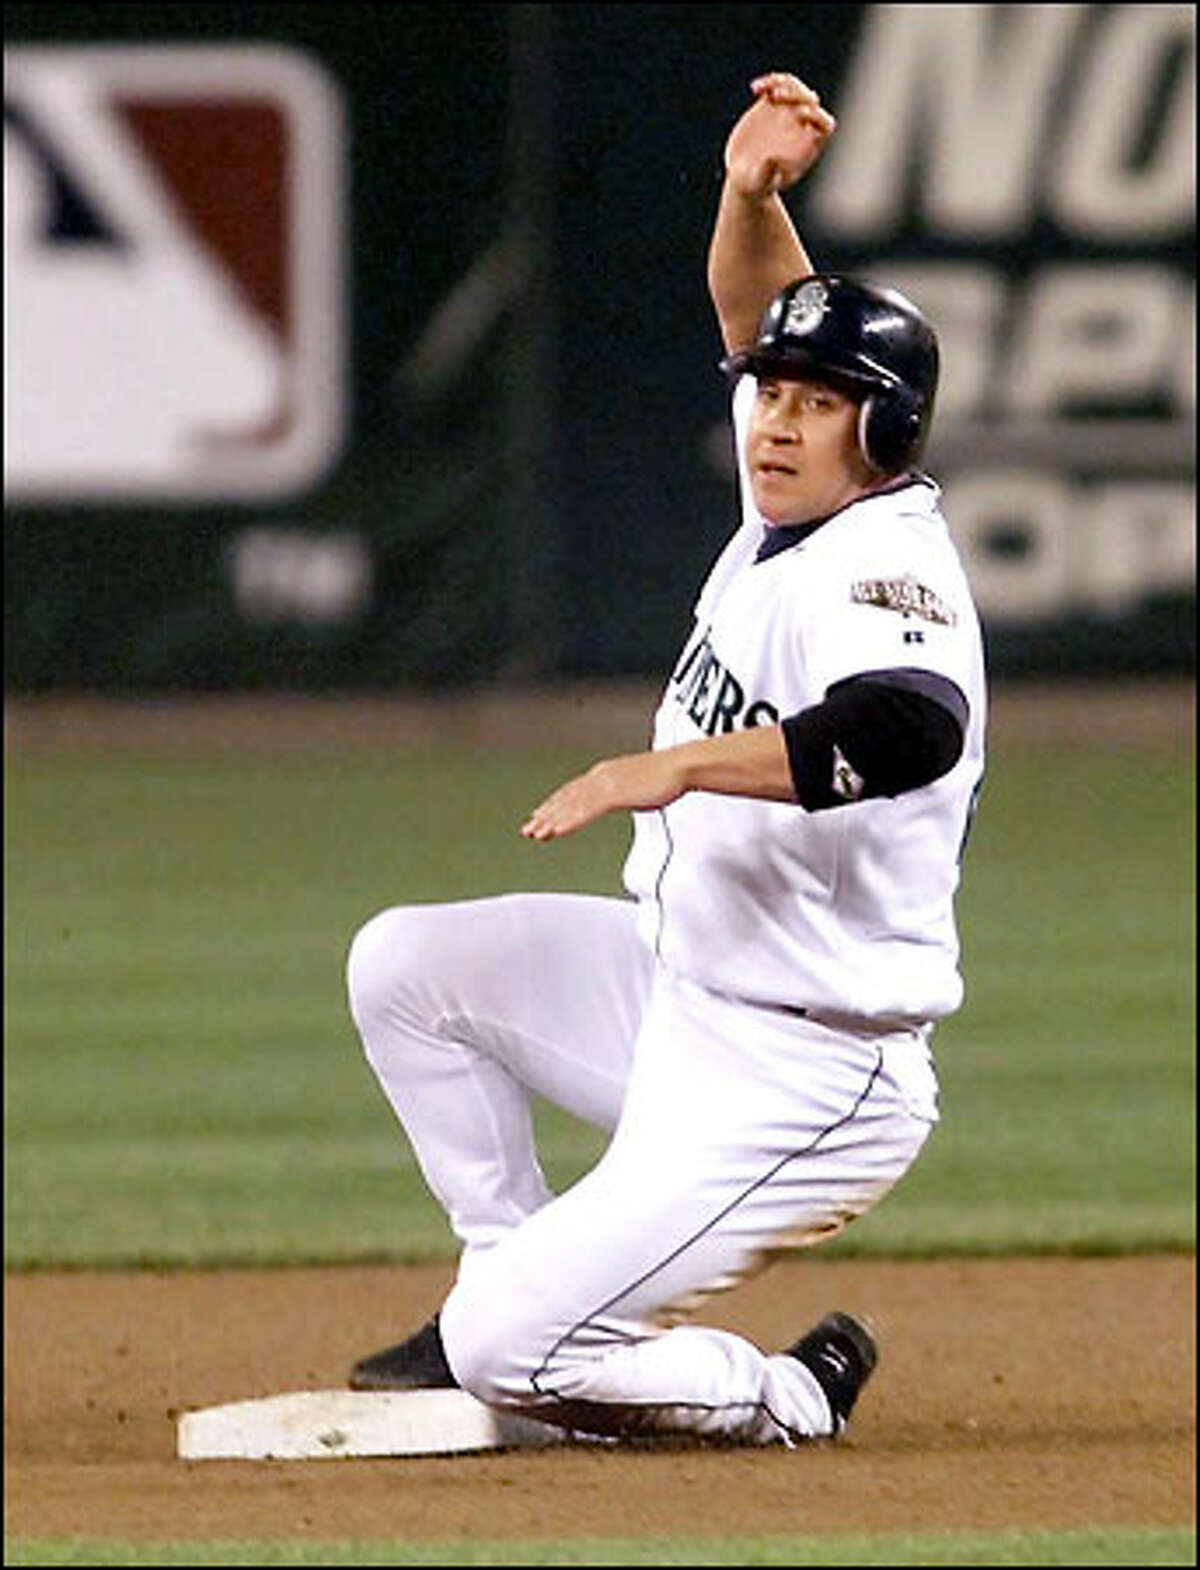 Bret Boone, running on a 3-2 pitch to Mike Cameron in the fourth inning, looks to see that ball four was called. Boone was in the lineup as the DH.